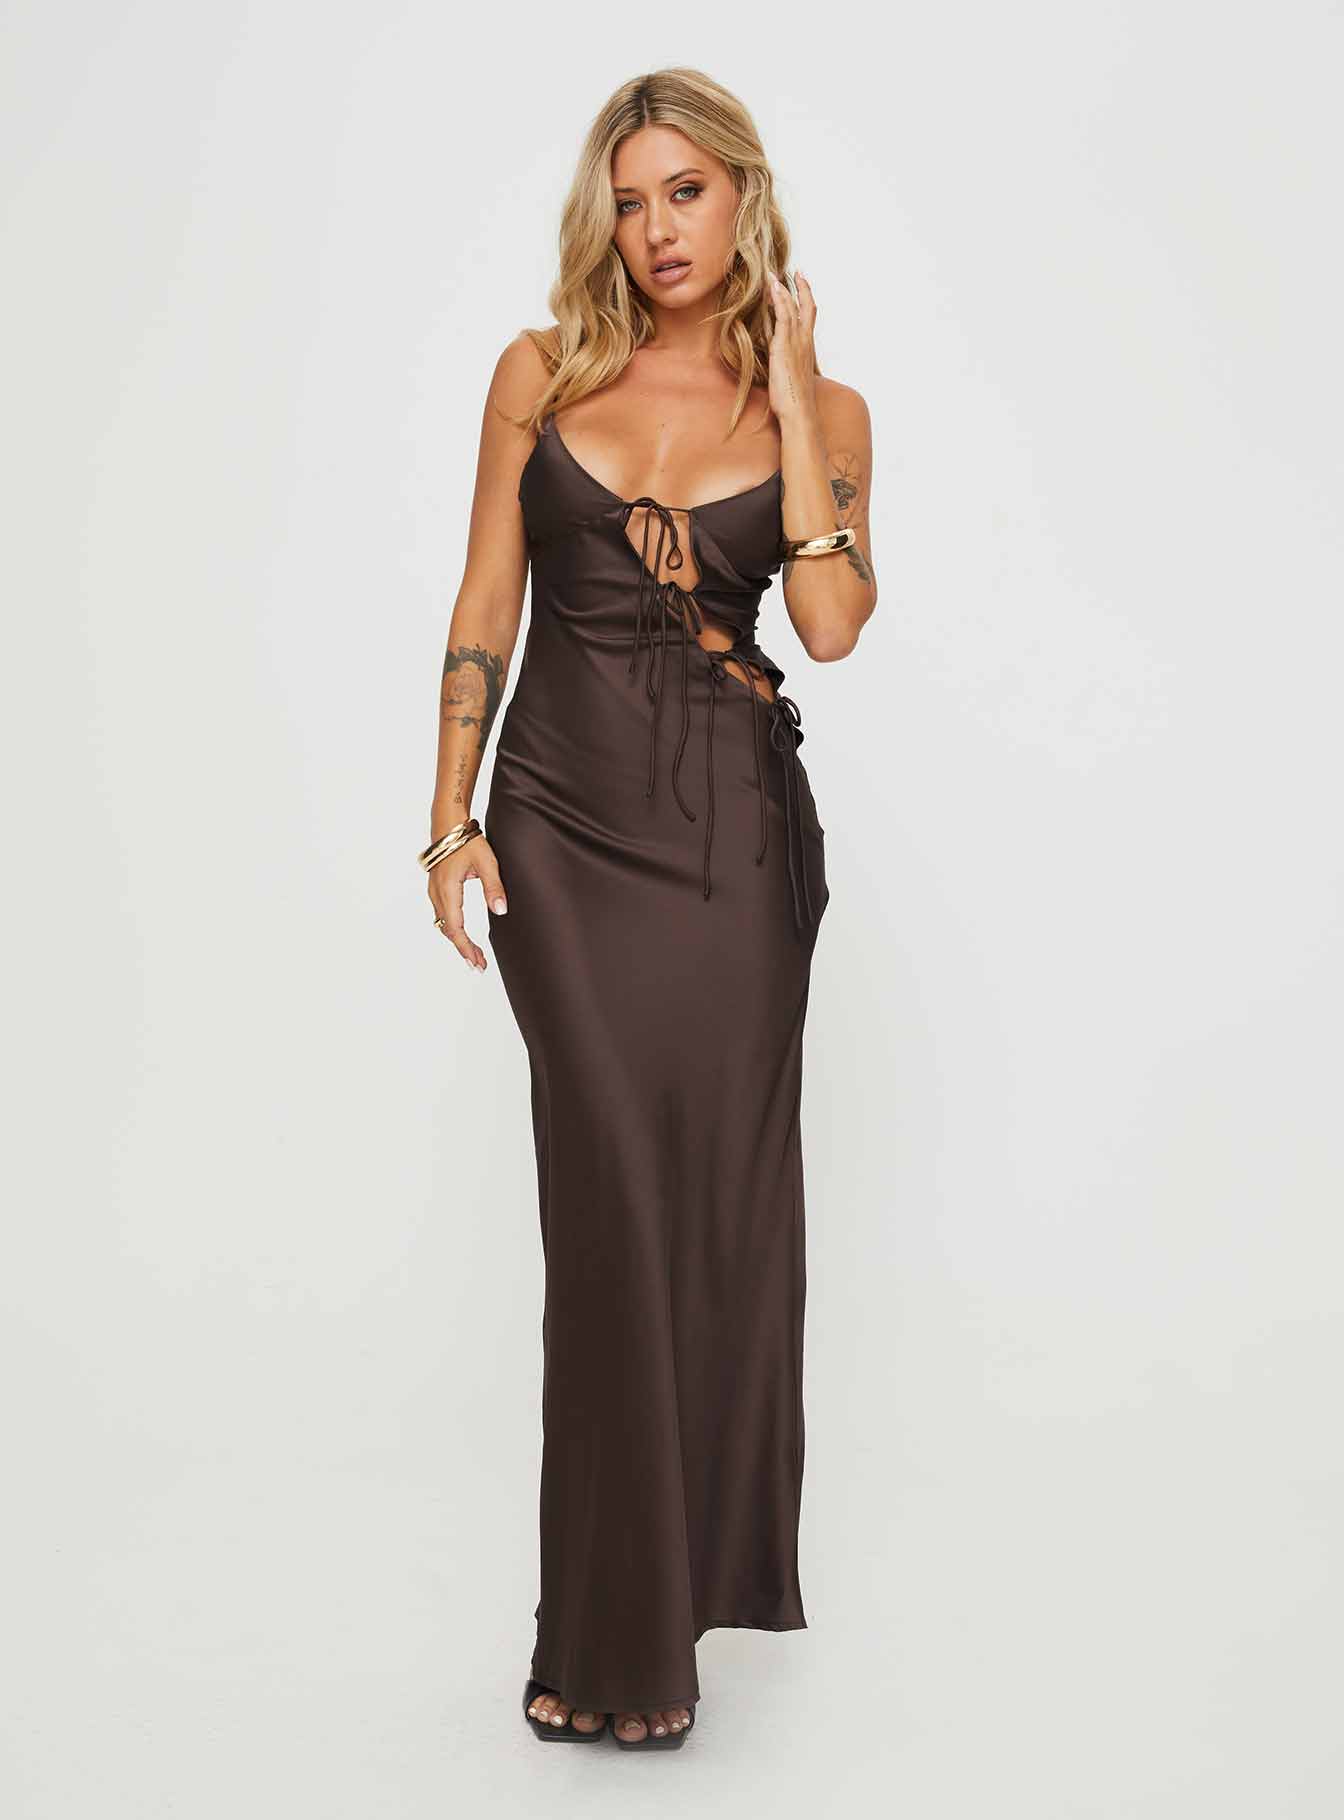 Shop Formal Dress - About A Girl Maxi Dress Chocolate fifth image